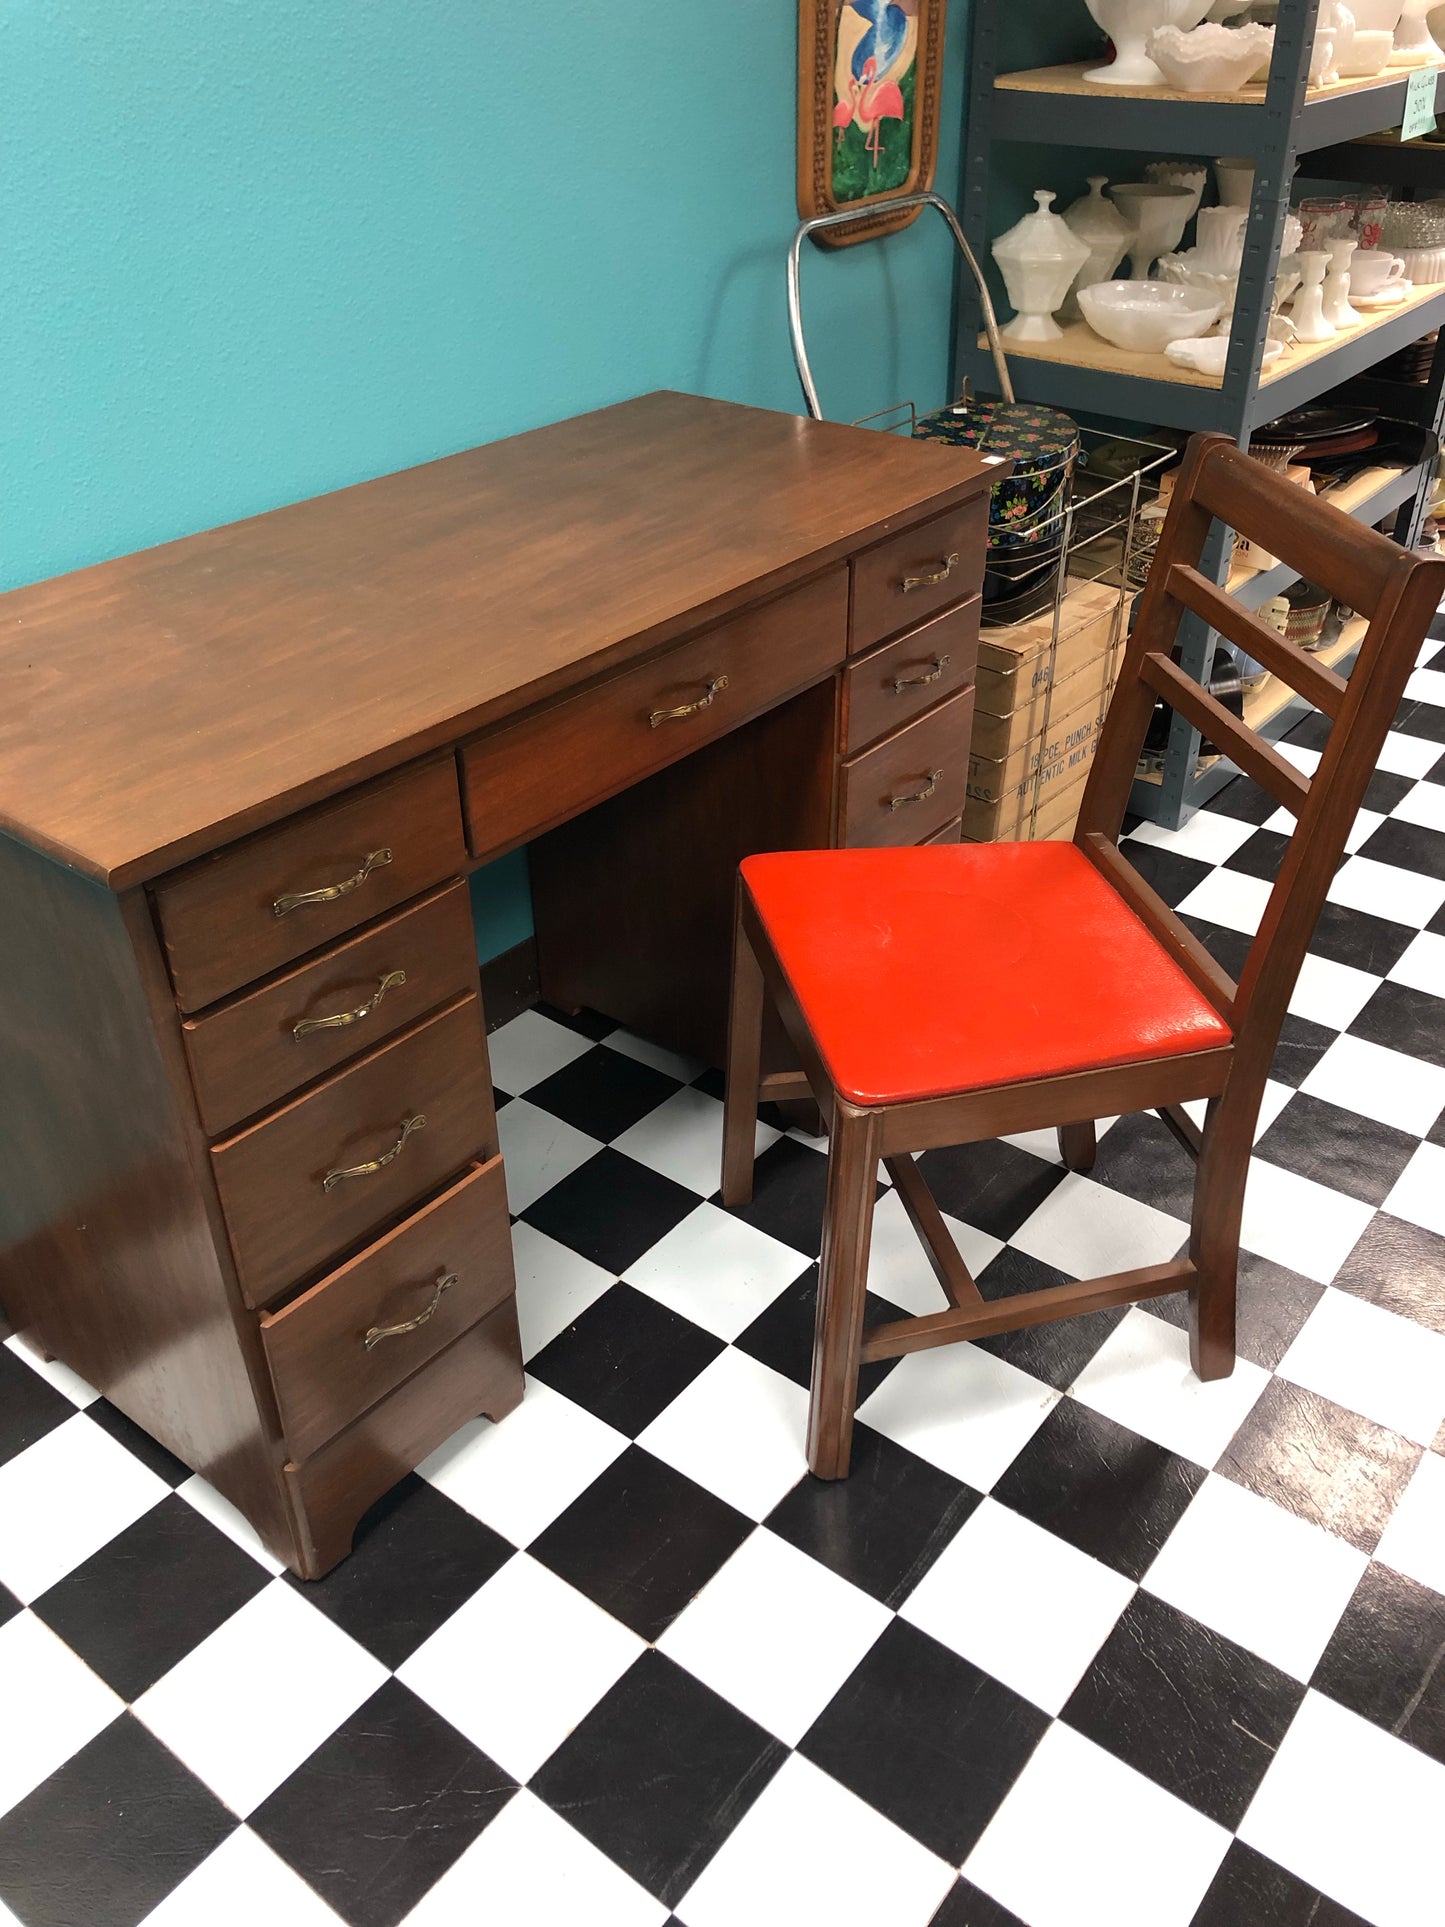 Wooden 8 drawer desk and chair with orange seat